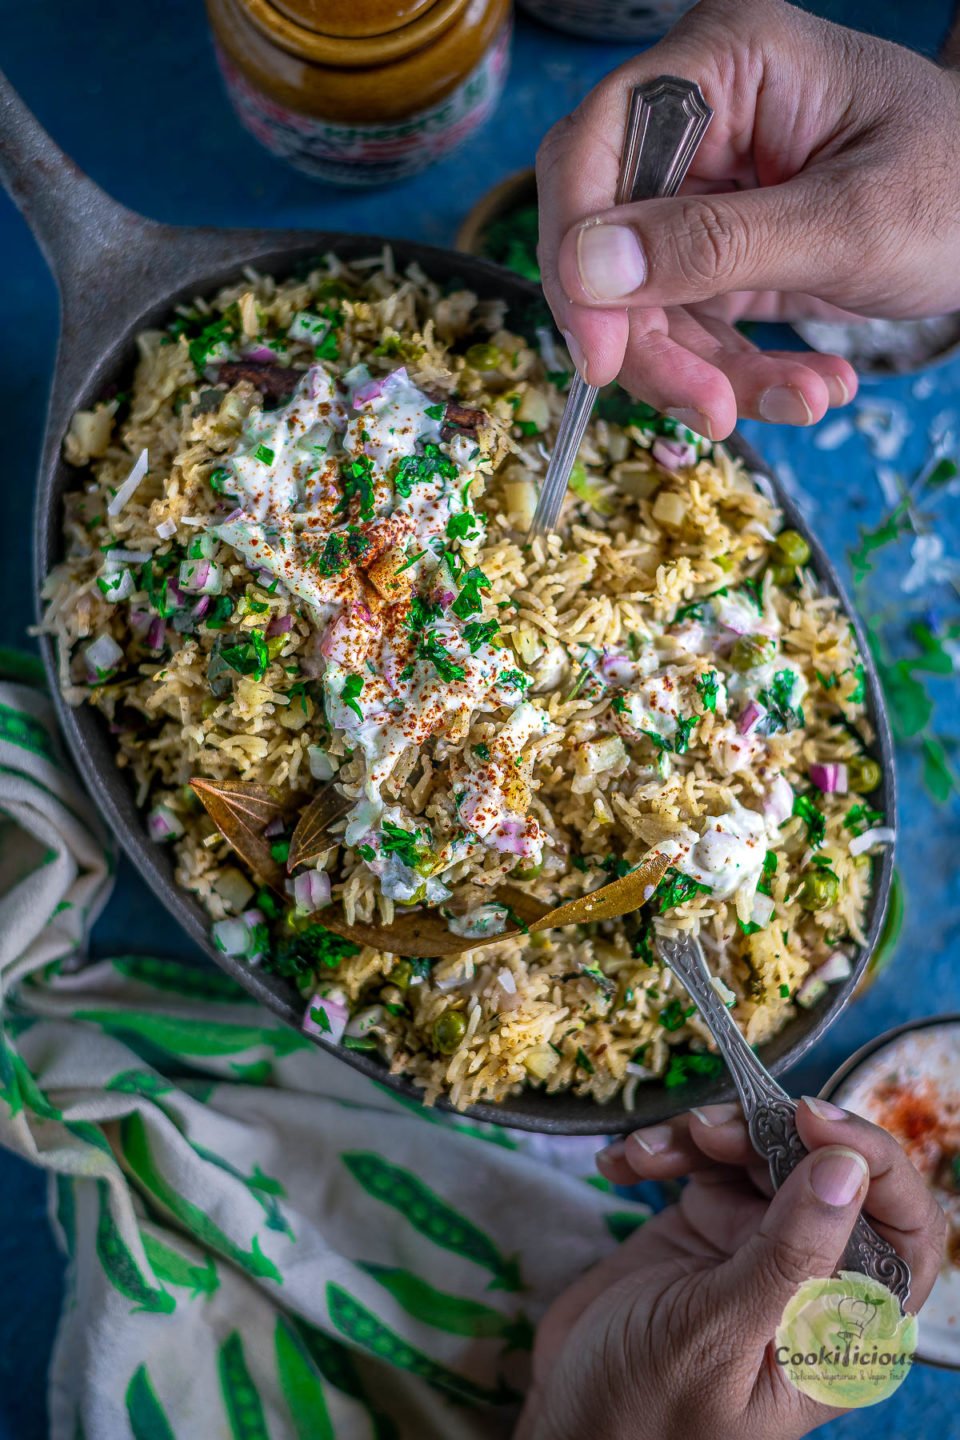 2 people digging into a platter of Potato Rice With Mint with spoons in their hands